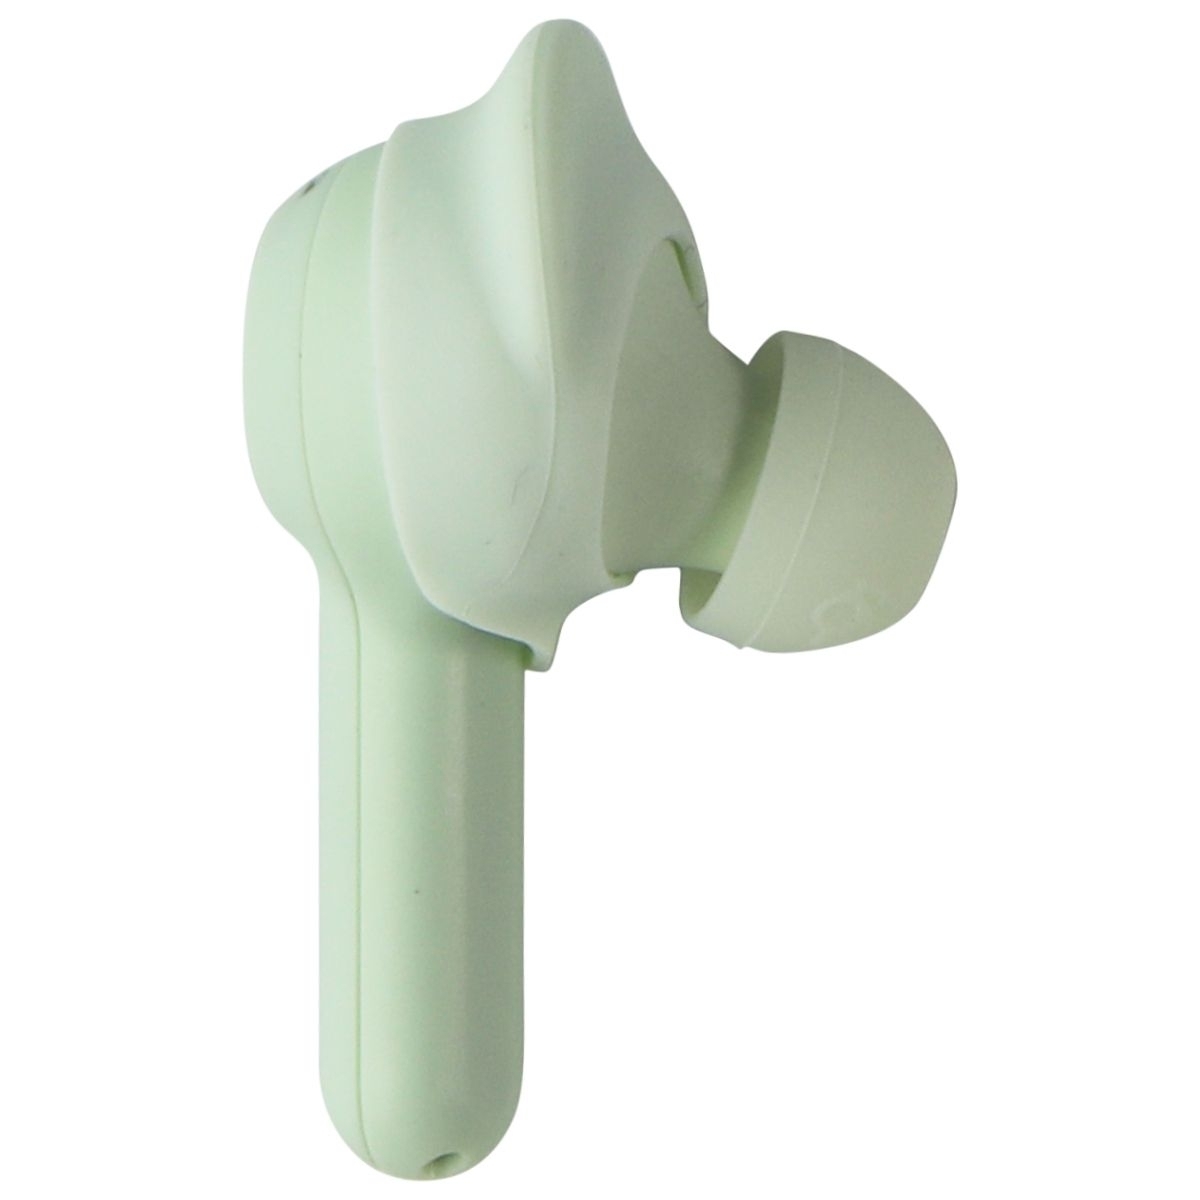 Skullcandy Indy Replacement LEFT Earbud - Mint Green